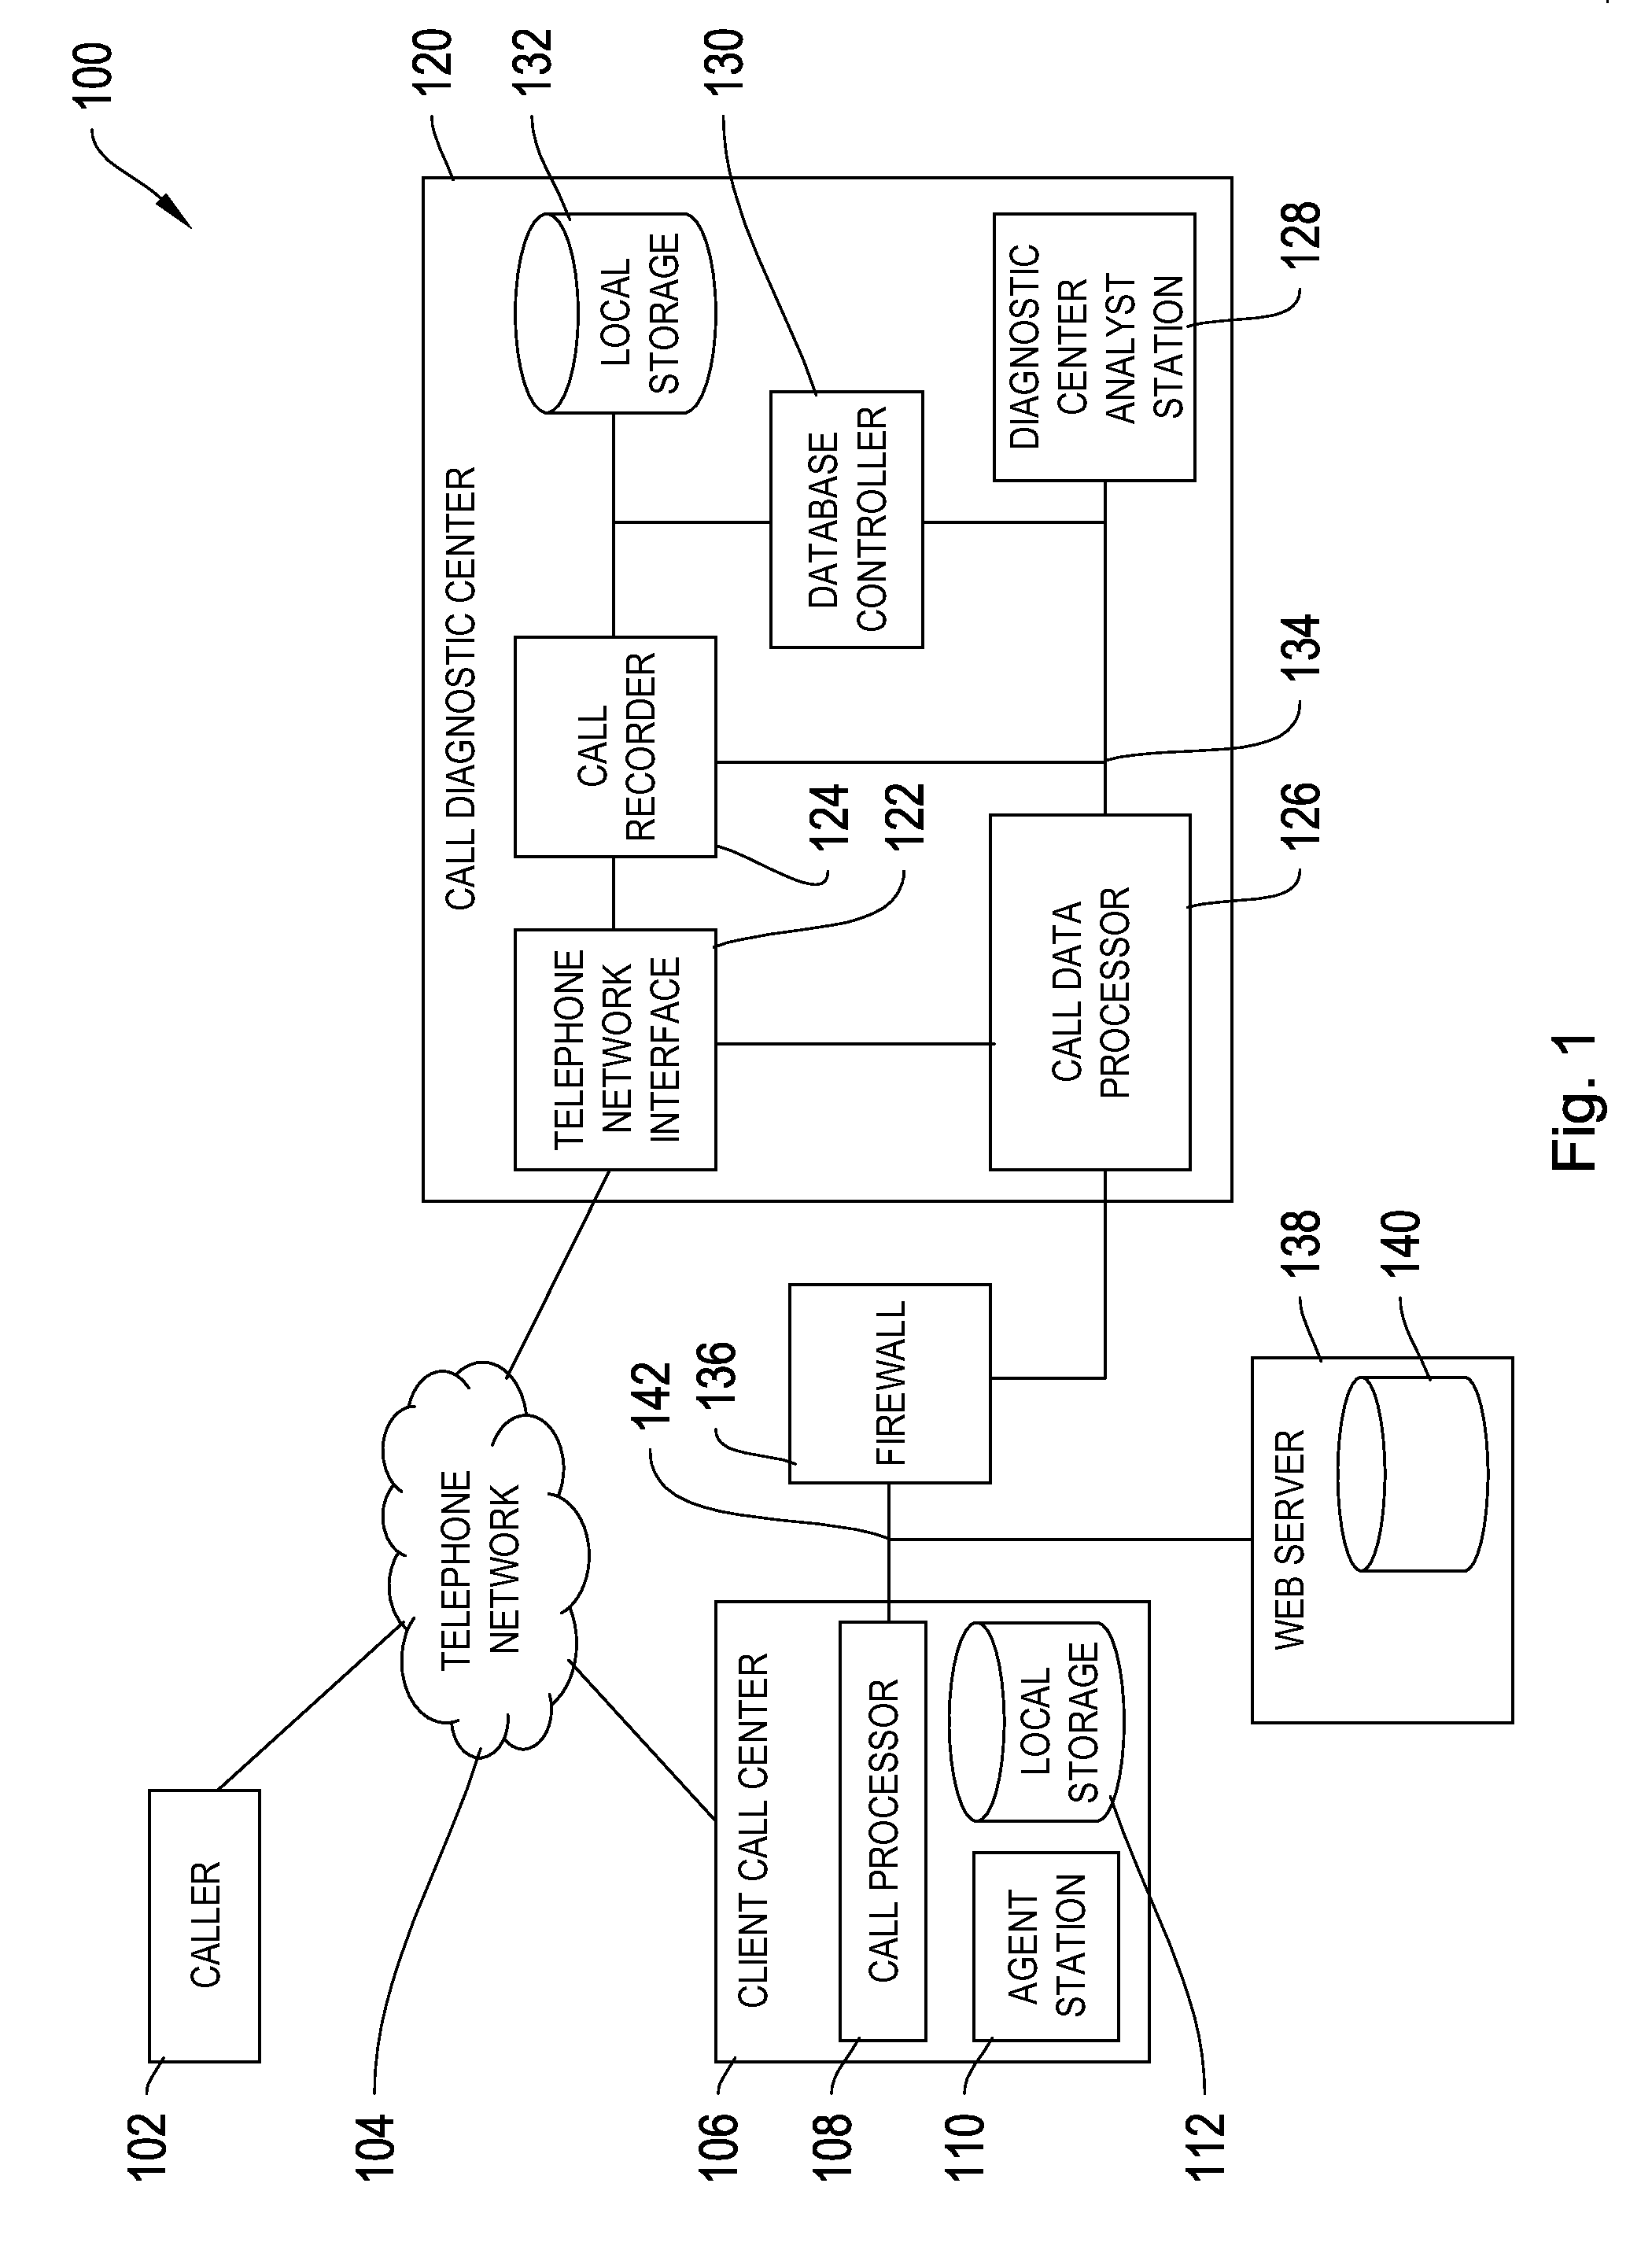 System and method for removing sensitive data from a recording